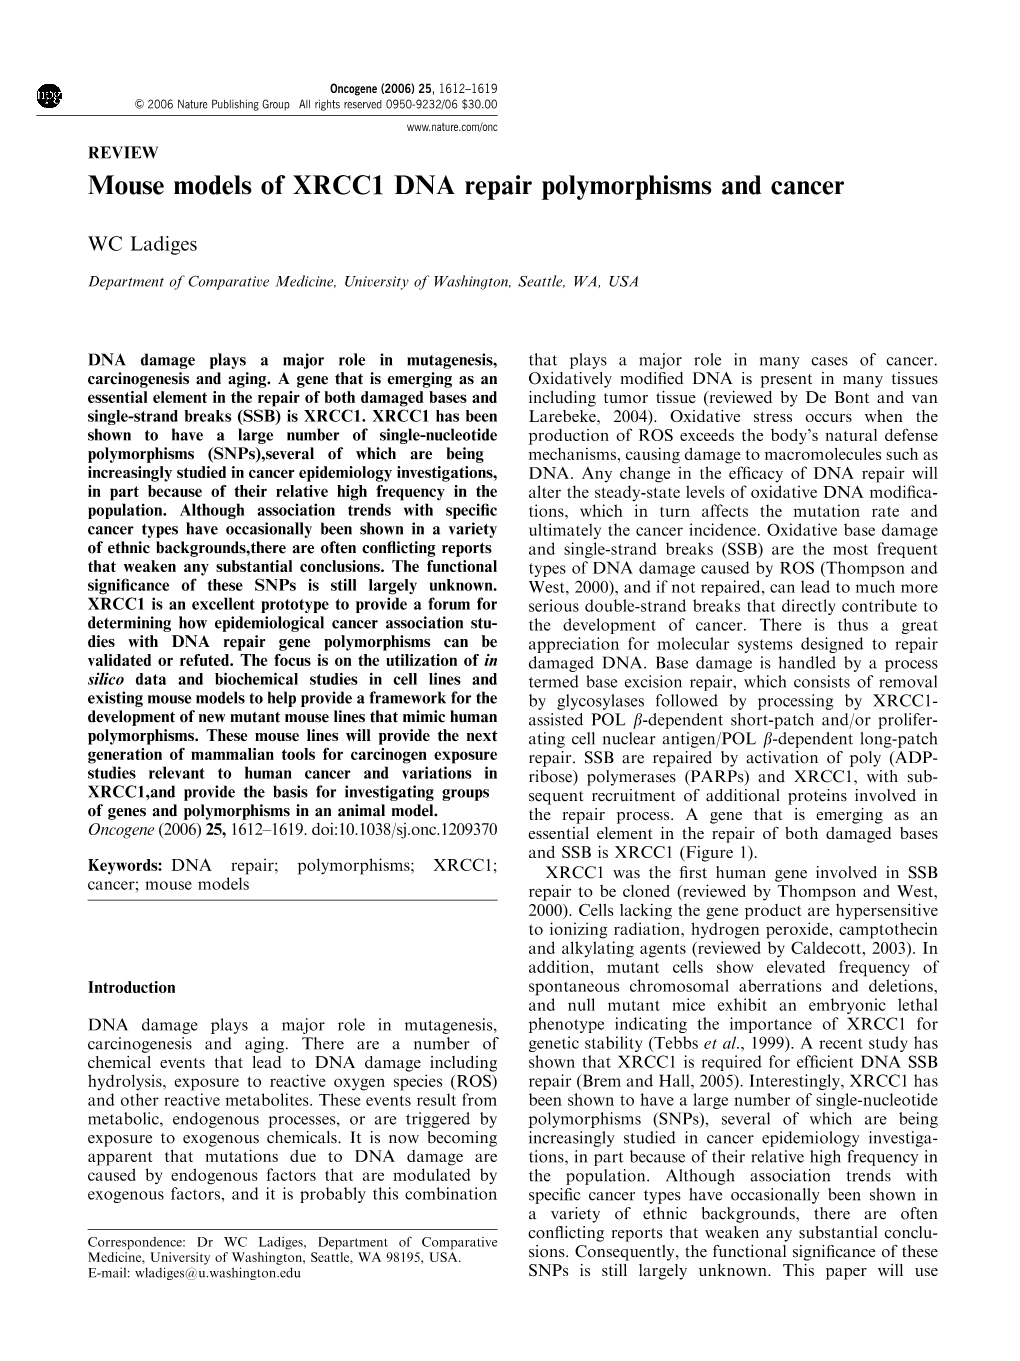 Mouse Models of XRCC1 DNA Repair Polymorphisms and Cancer